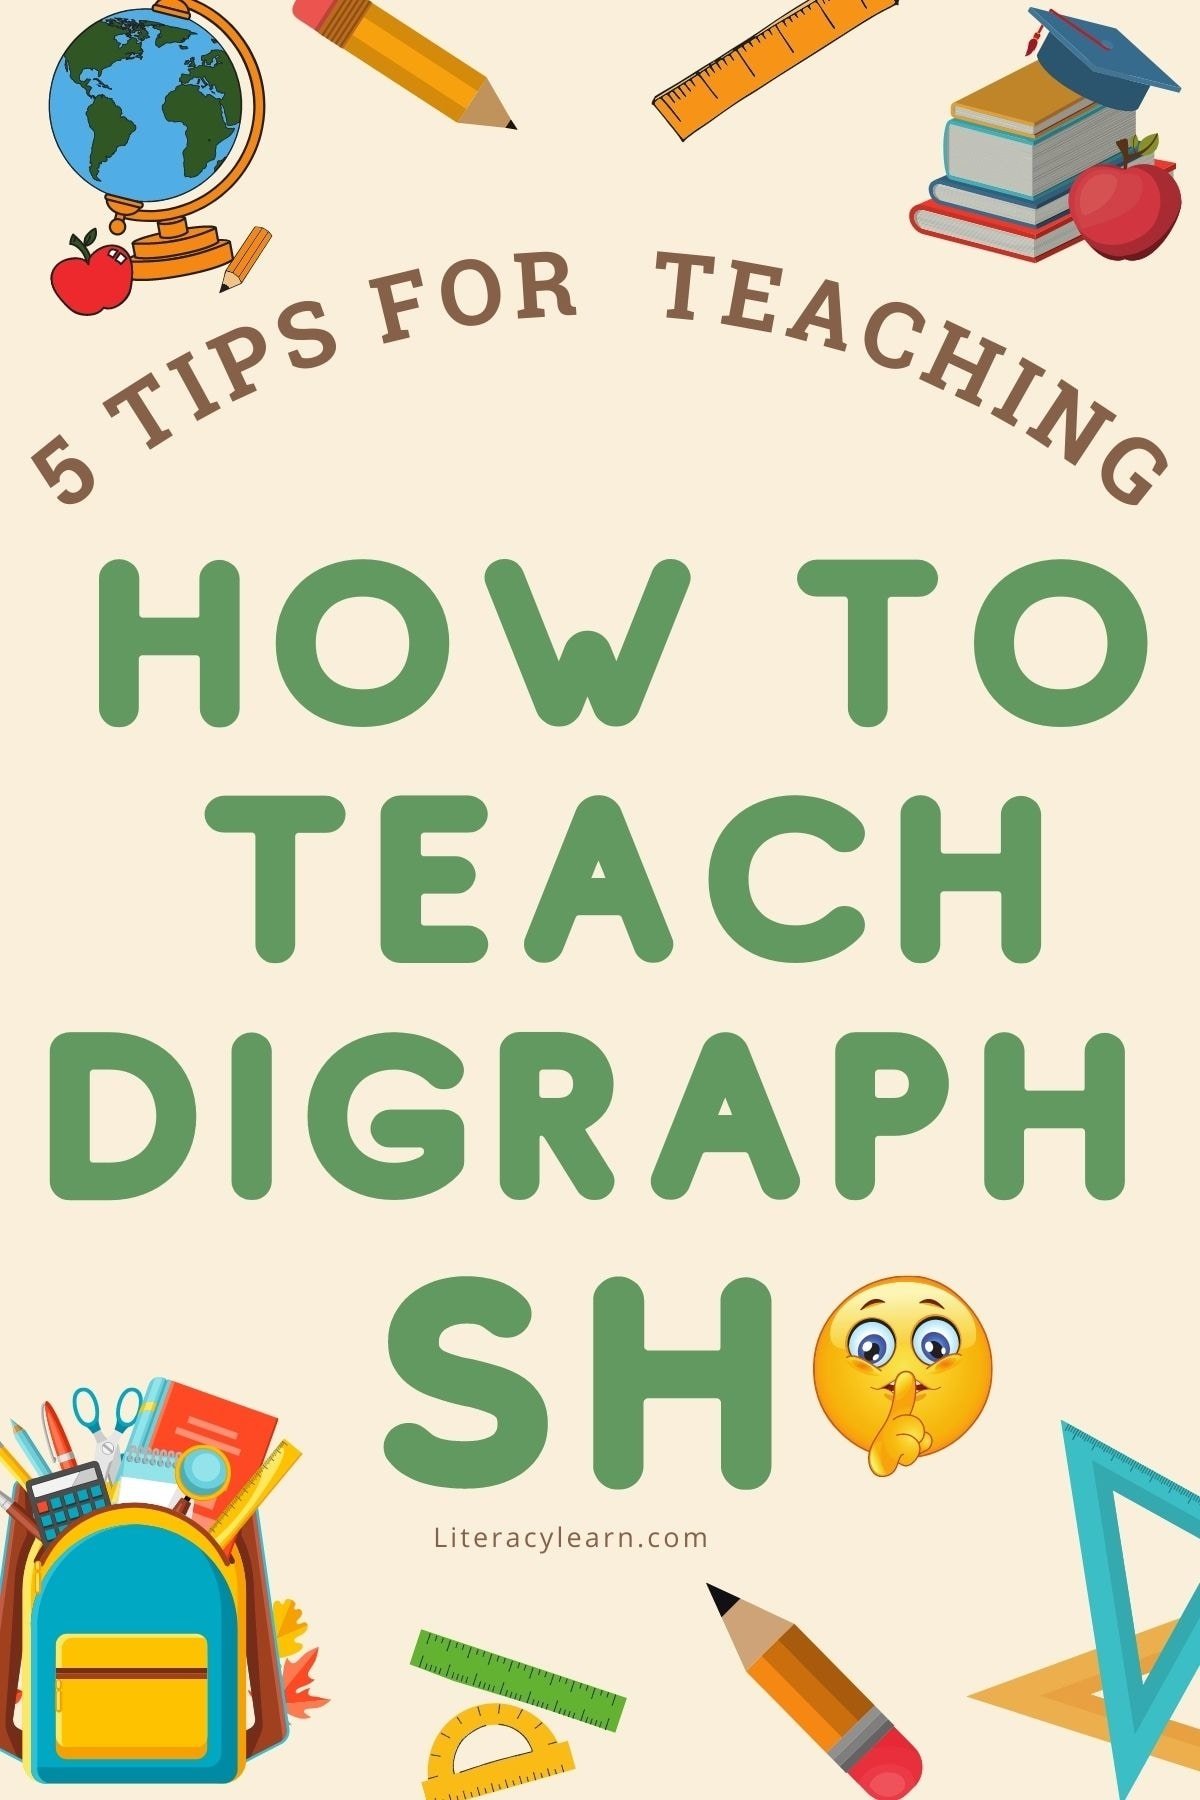 Graphic with words "How To Teach Digraph SH" with images of school items.